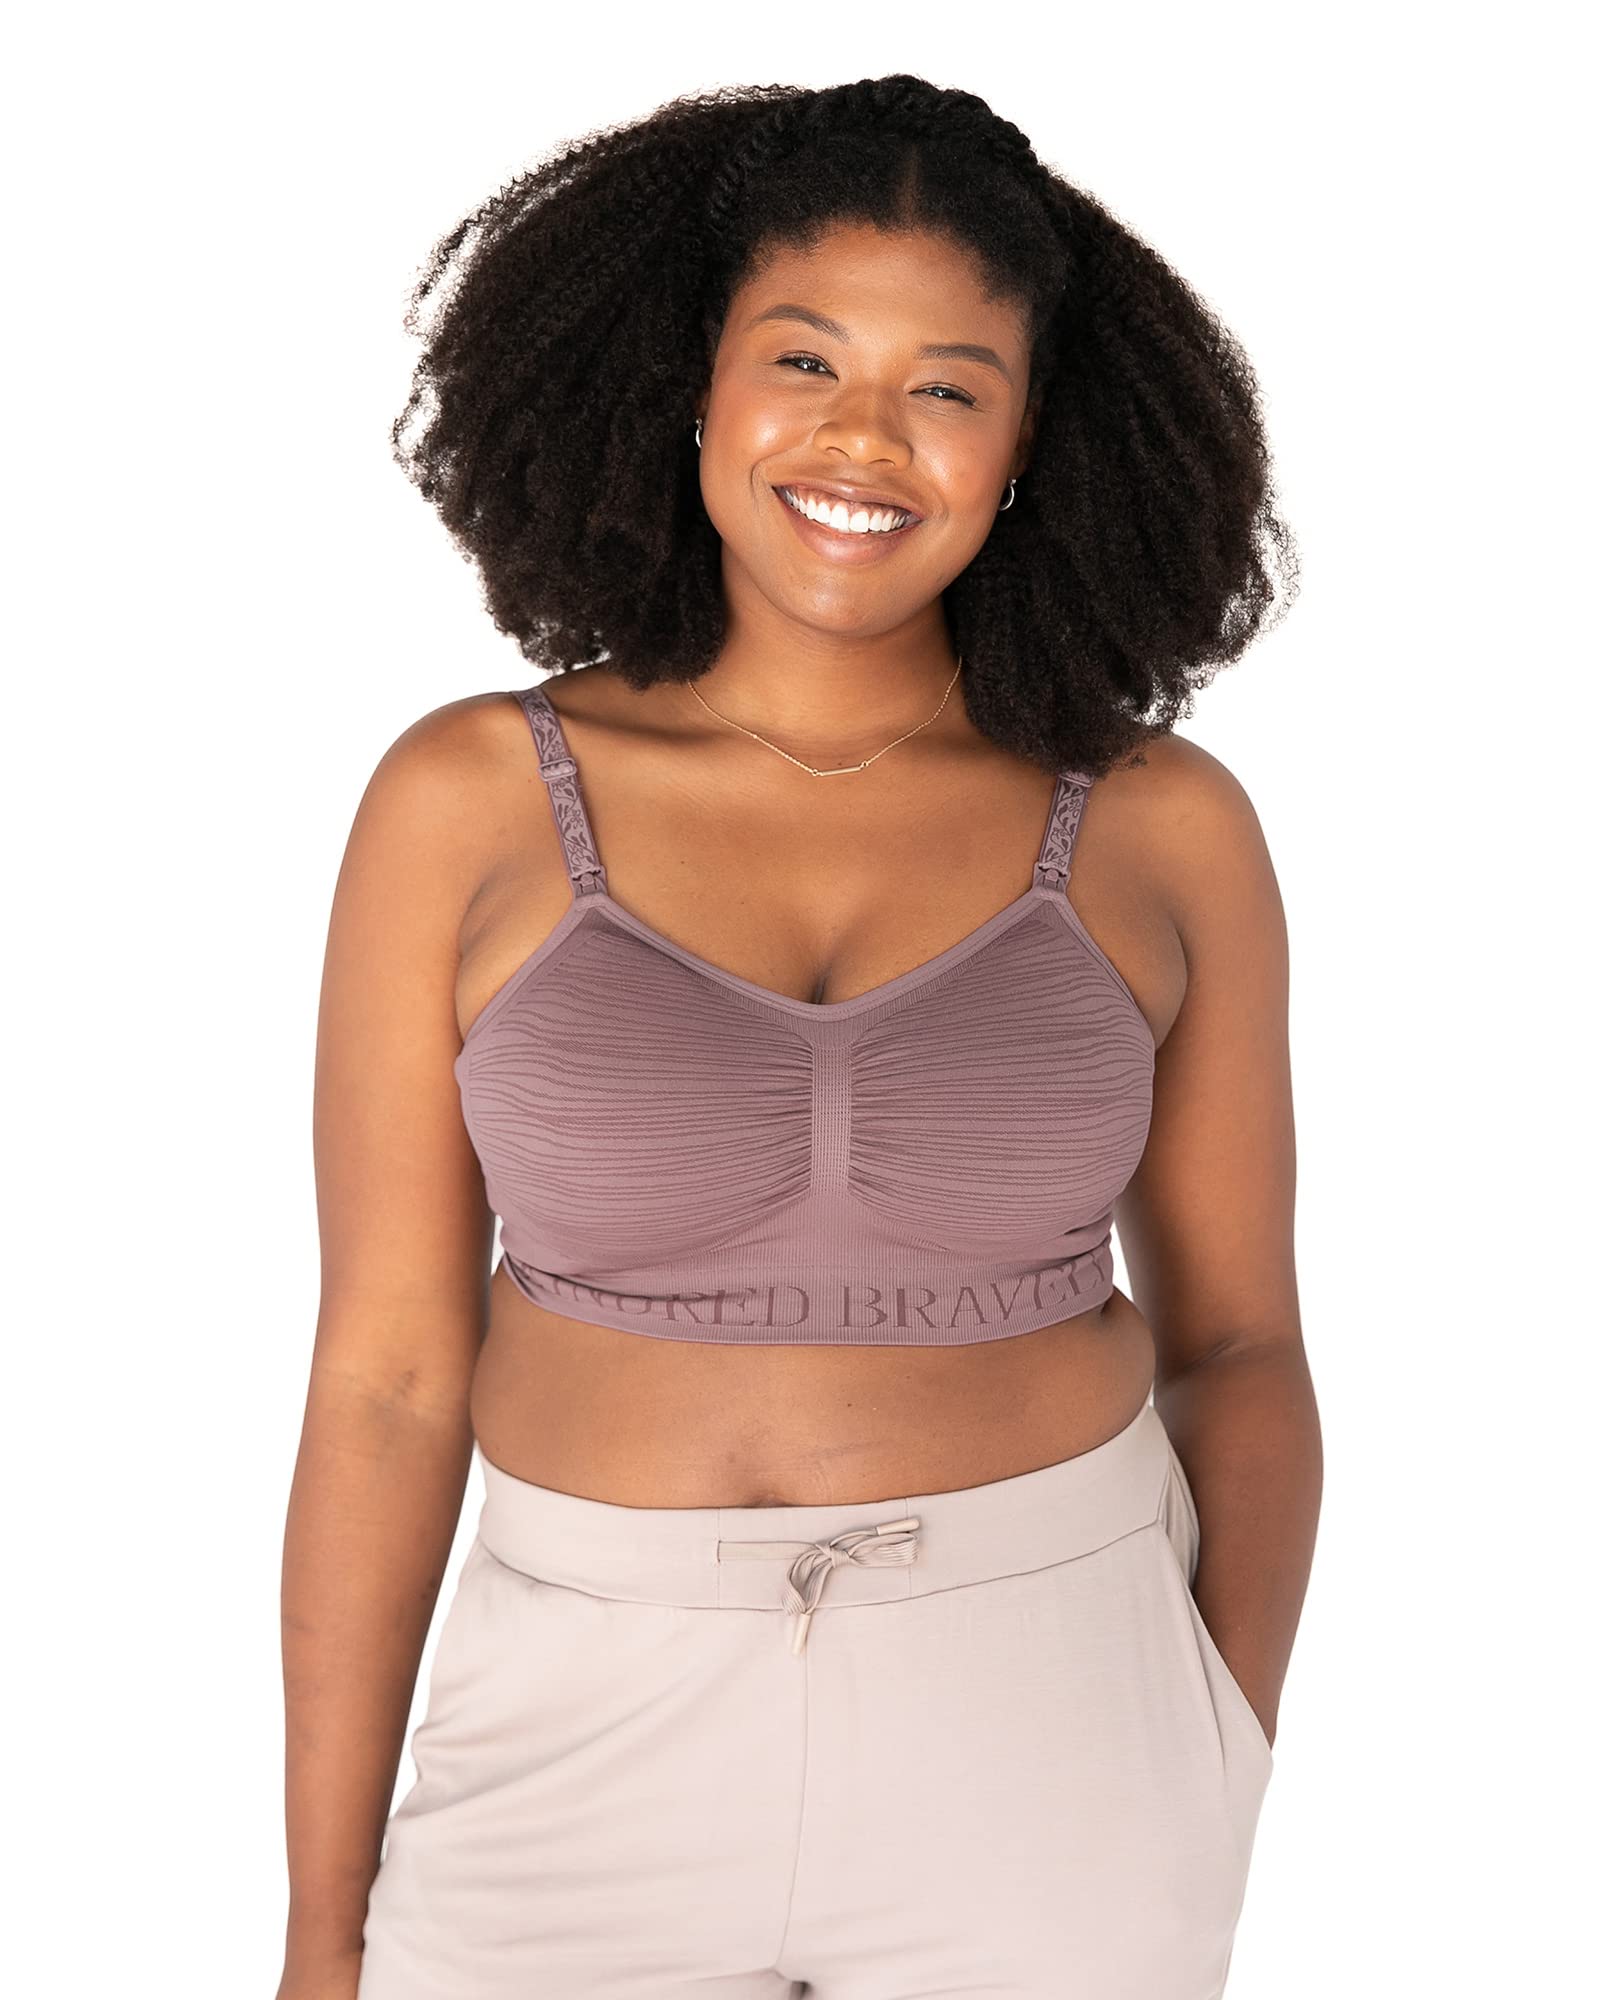 Kindred Bravely Sublime Hands Free Pumping Bra  Patented All-in-One Pumping & Nursing Bra with Easyclip (Twilight, Large)